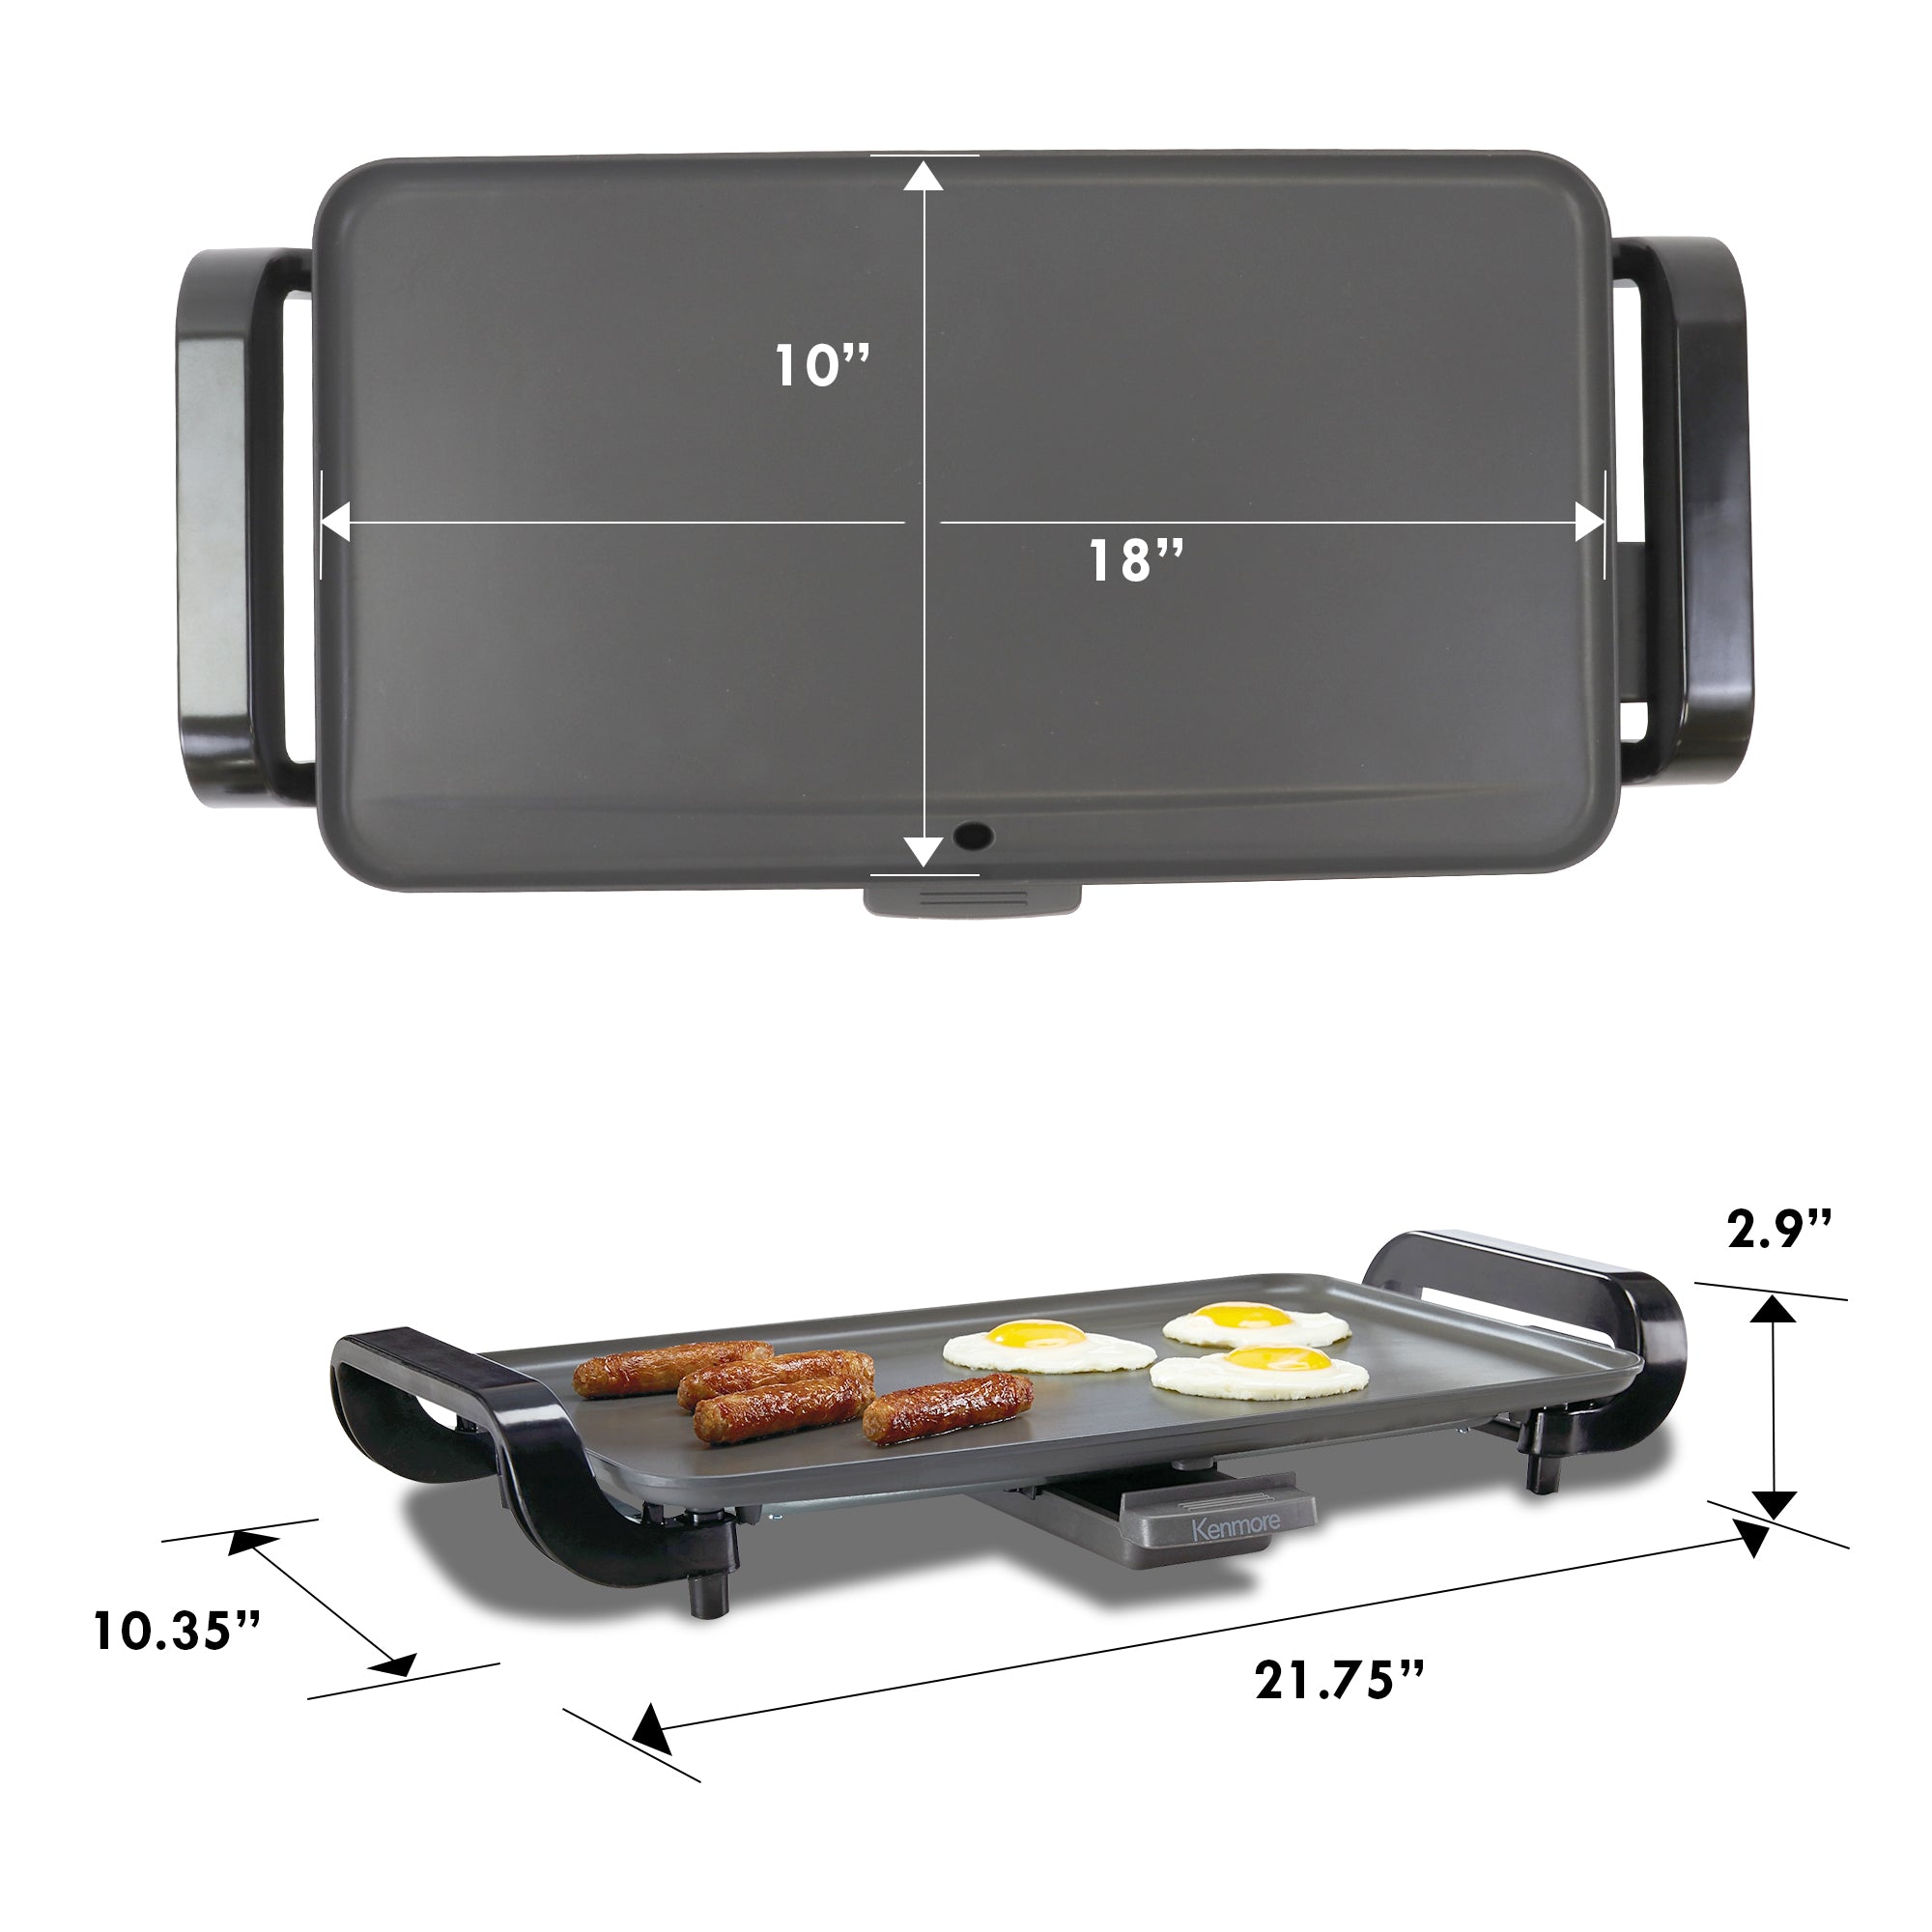 Two pictures of Kenmore non-stick electric griddle on a white background with dimensions labeled. Top image shows the cooking surface from above and bottom image shows the griddle from the side with sausage and eggs cooking